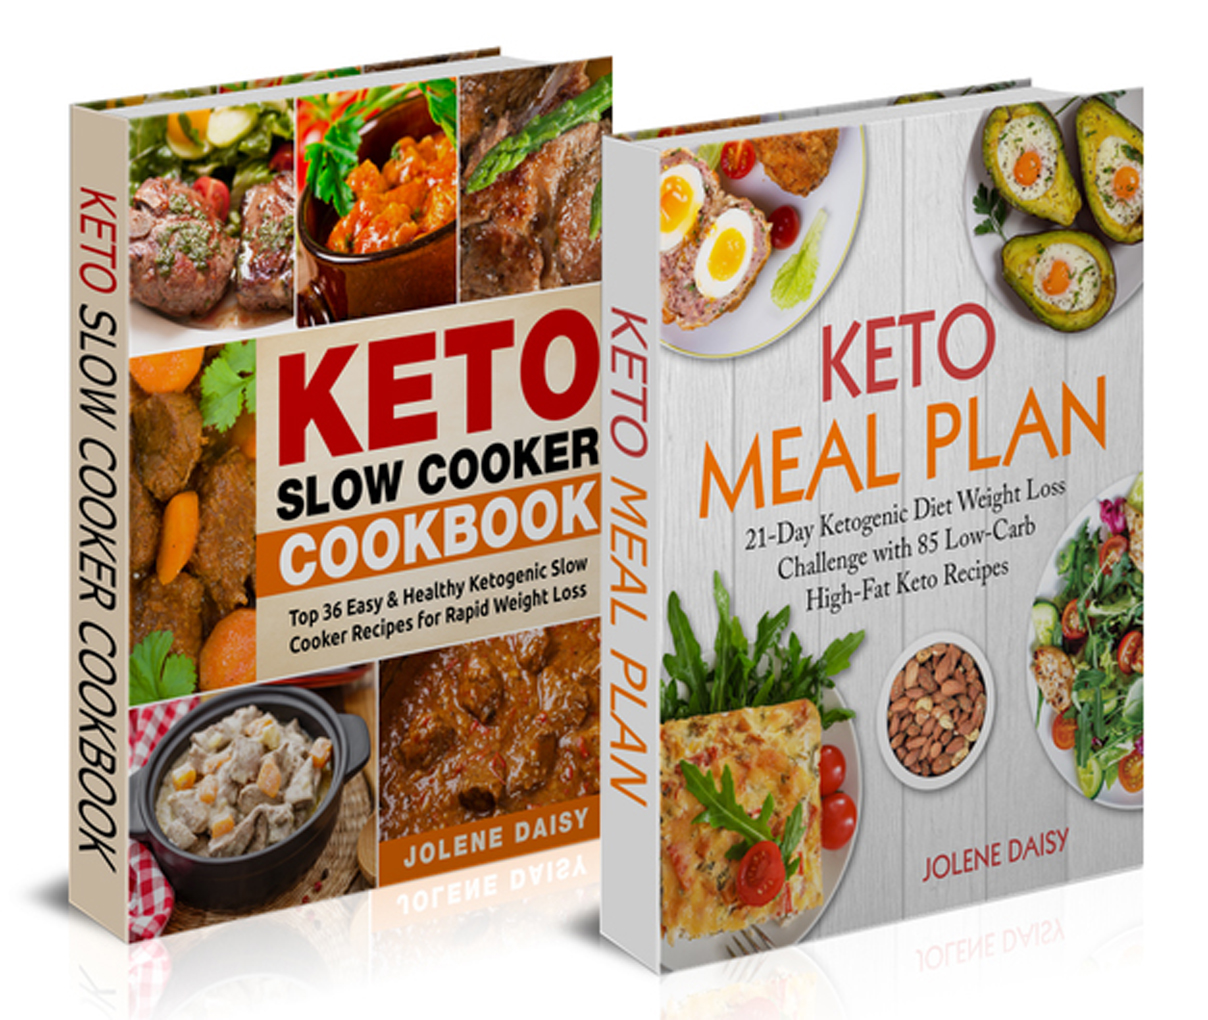 FREE: Keto Cookbook: Two Manuscripts in One Keto Guide. Keto Bundle: Keto Meal Plan and Keto Slow Cooker Cookbook by Jolene Daisy